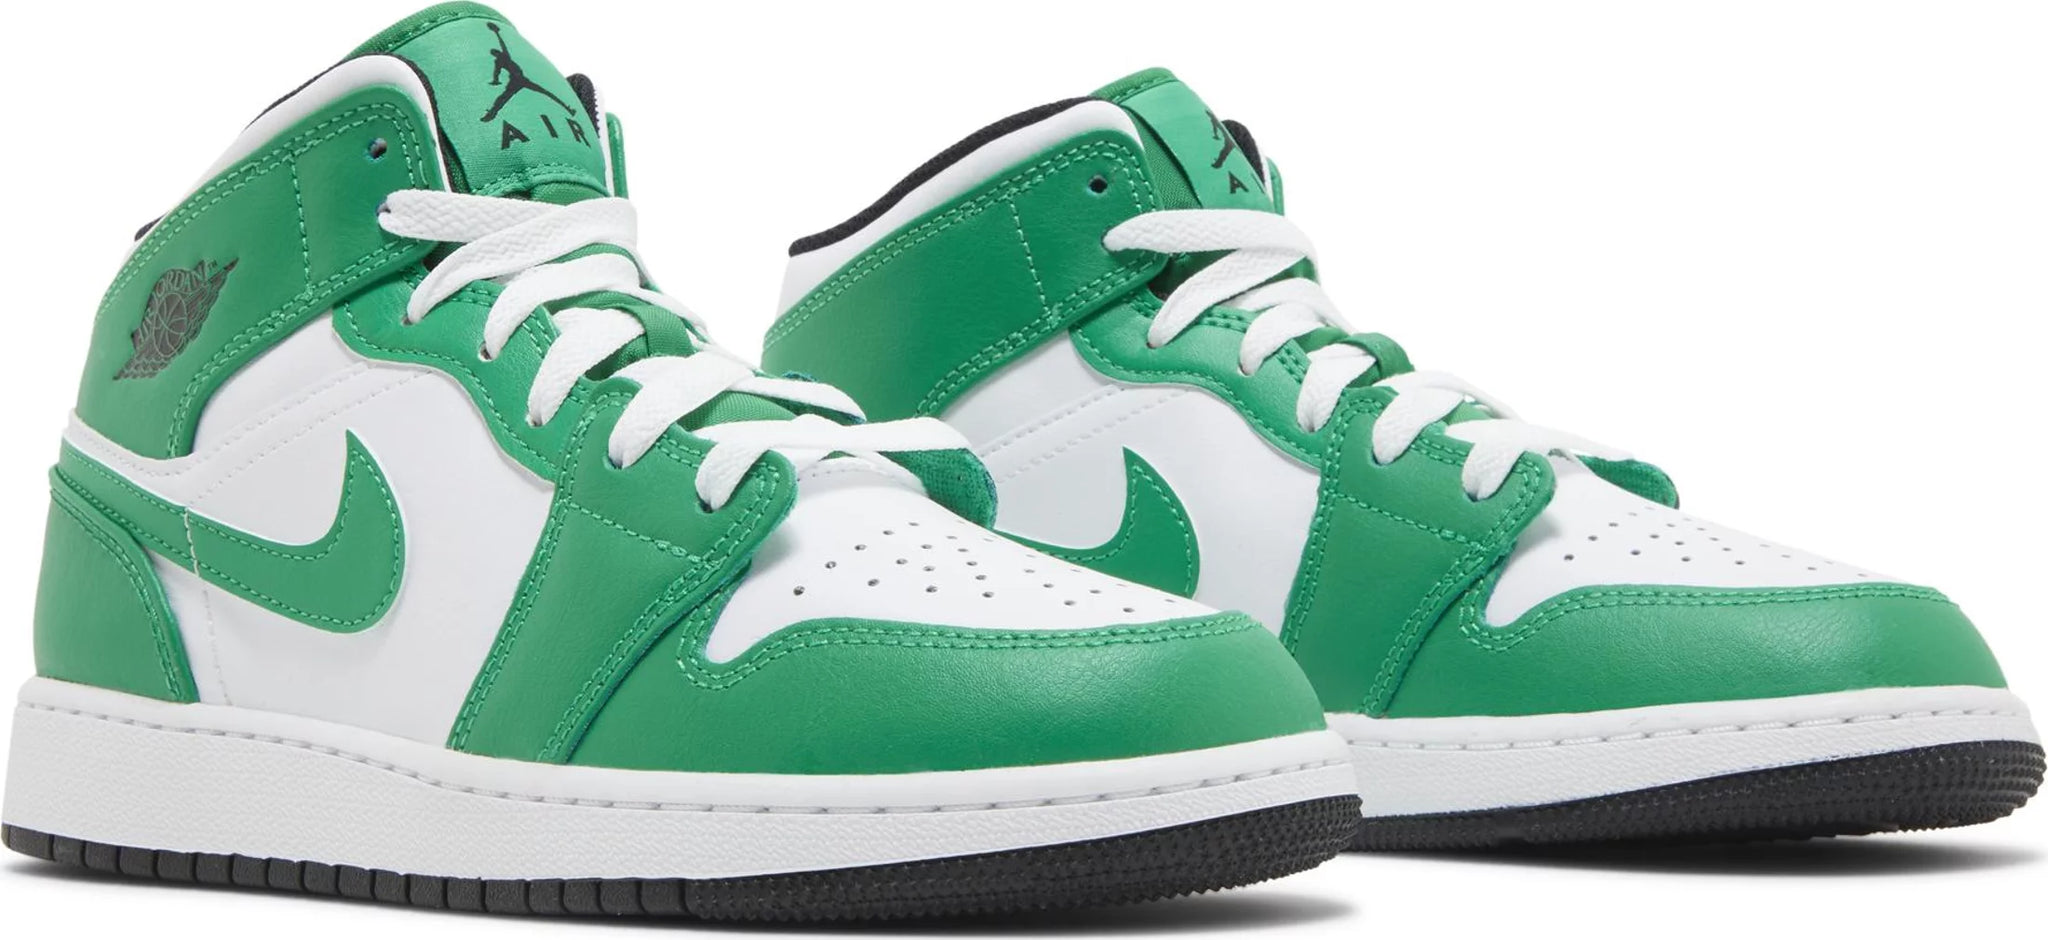 Double Boxed  274.99 Nike Air Jordan 1 Mid Lucky Green (GS) Double Boxed